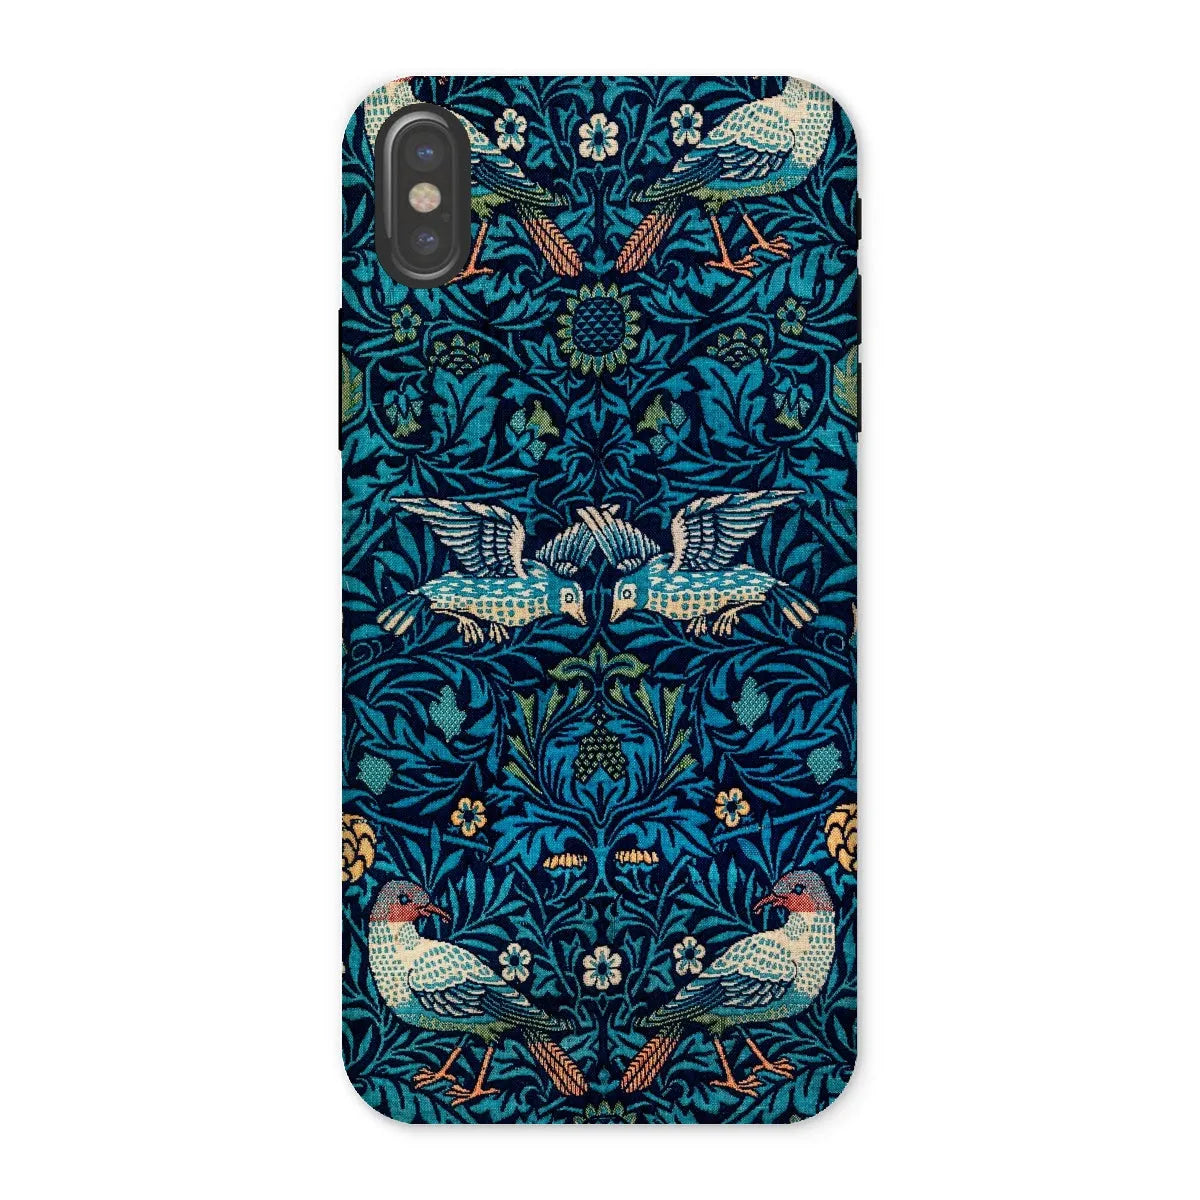 Birds By William Morris - Aesthetic Pattern Art Phone Case - Iphone x / Matte - Mobile Phone Cases - Aesthetic Art